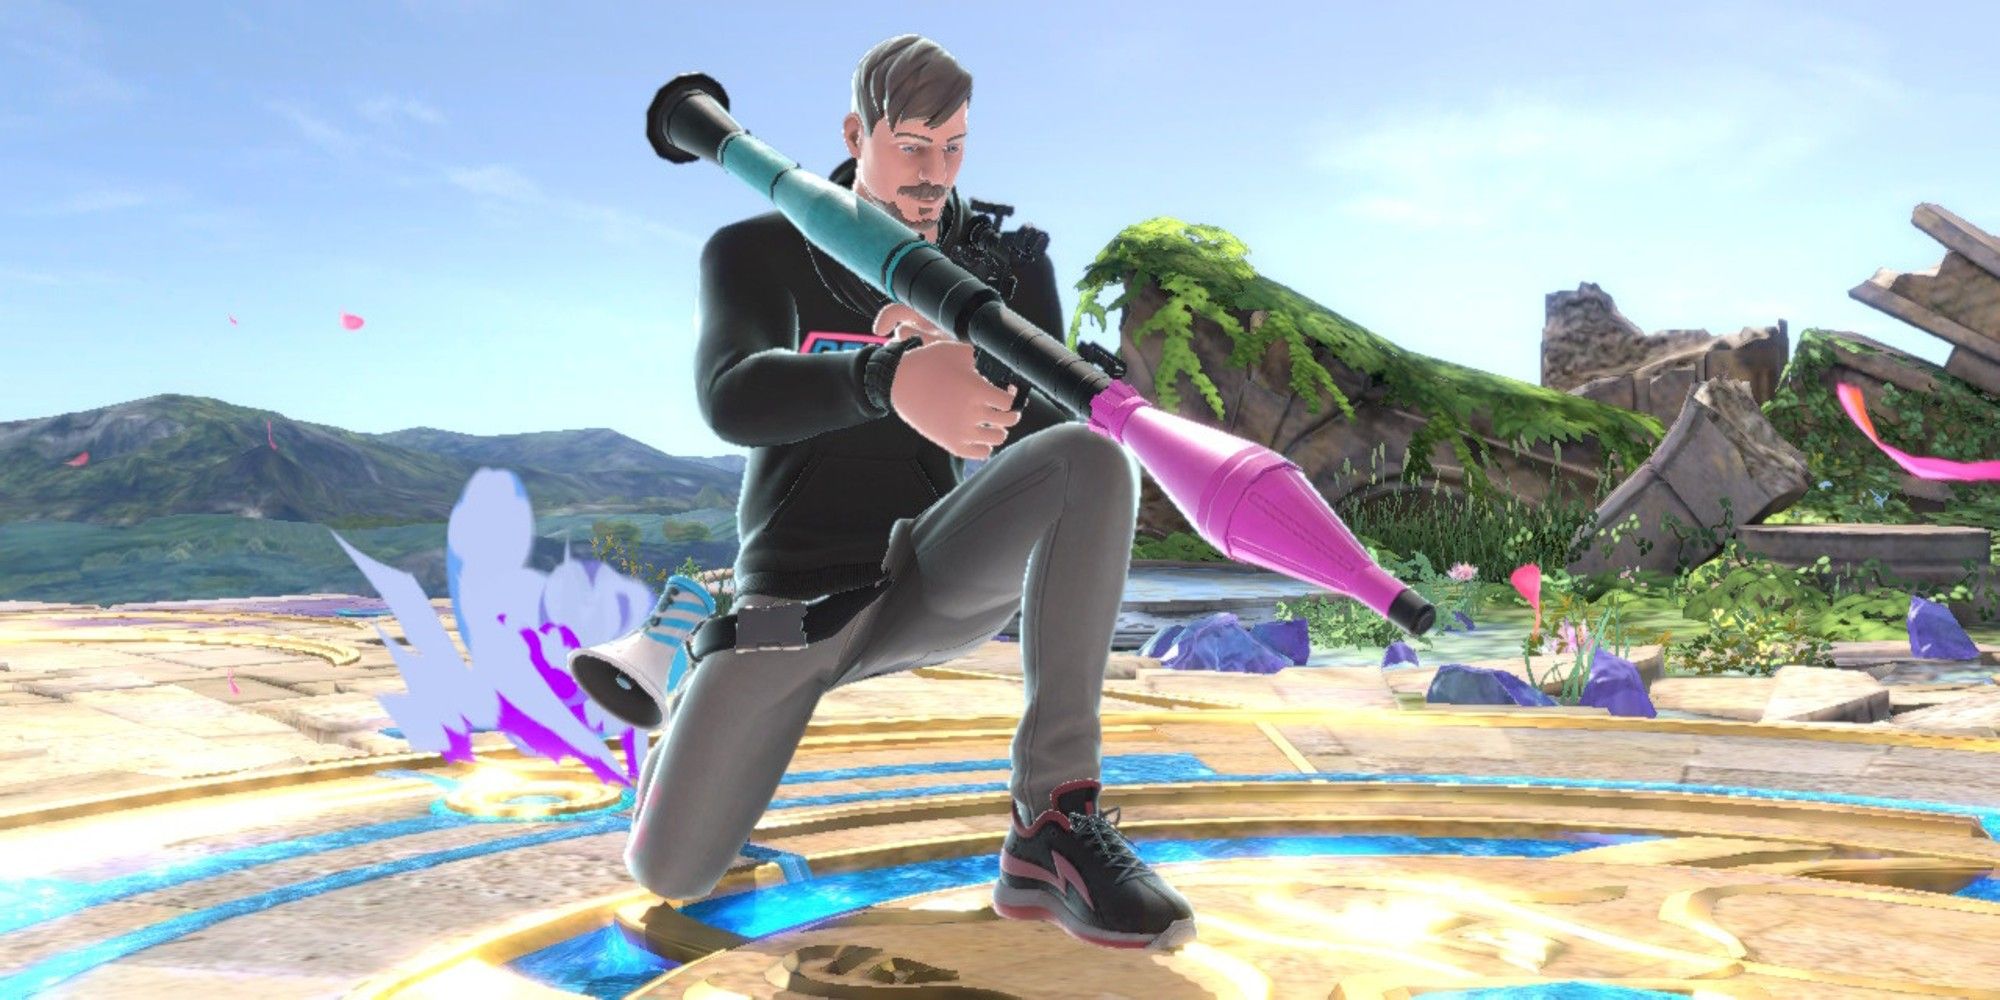 MrBeast holding a rocket leauncher in super smash bros